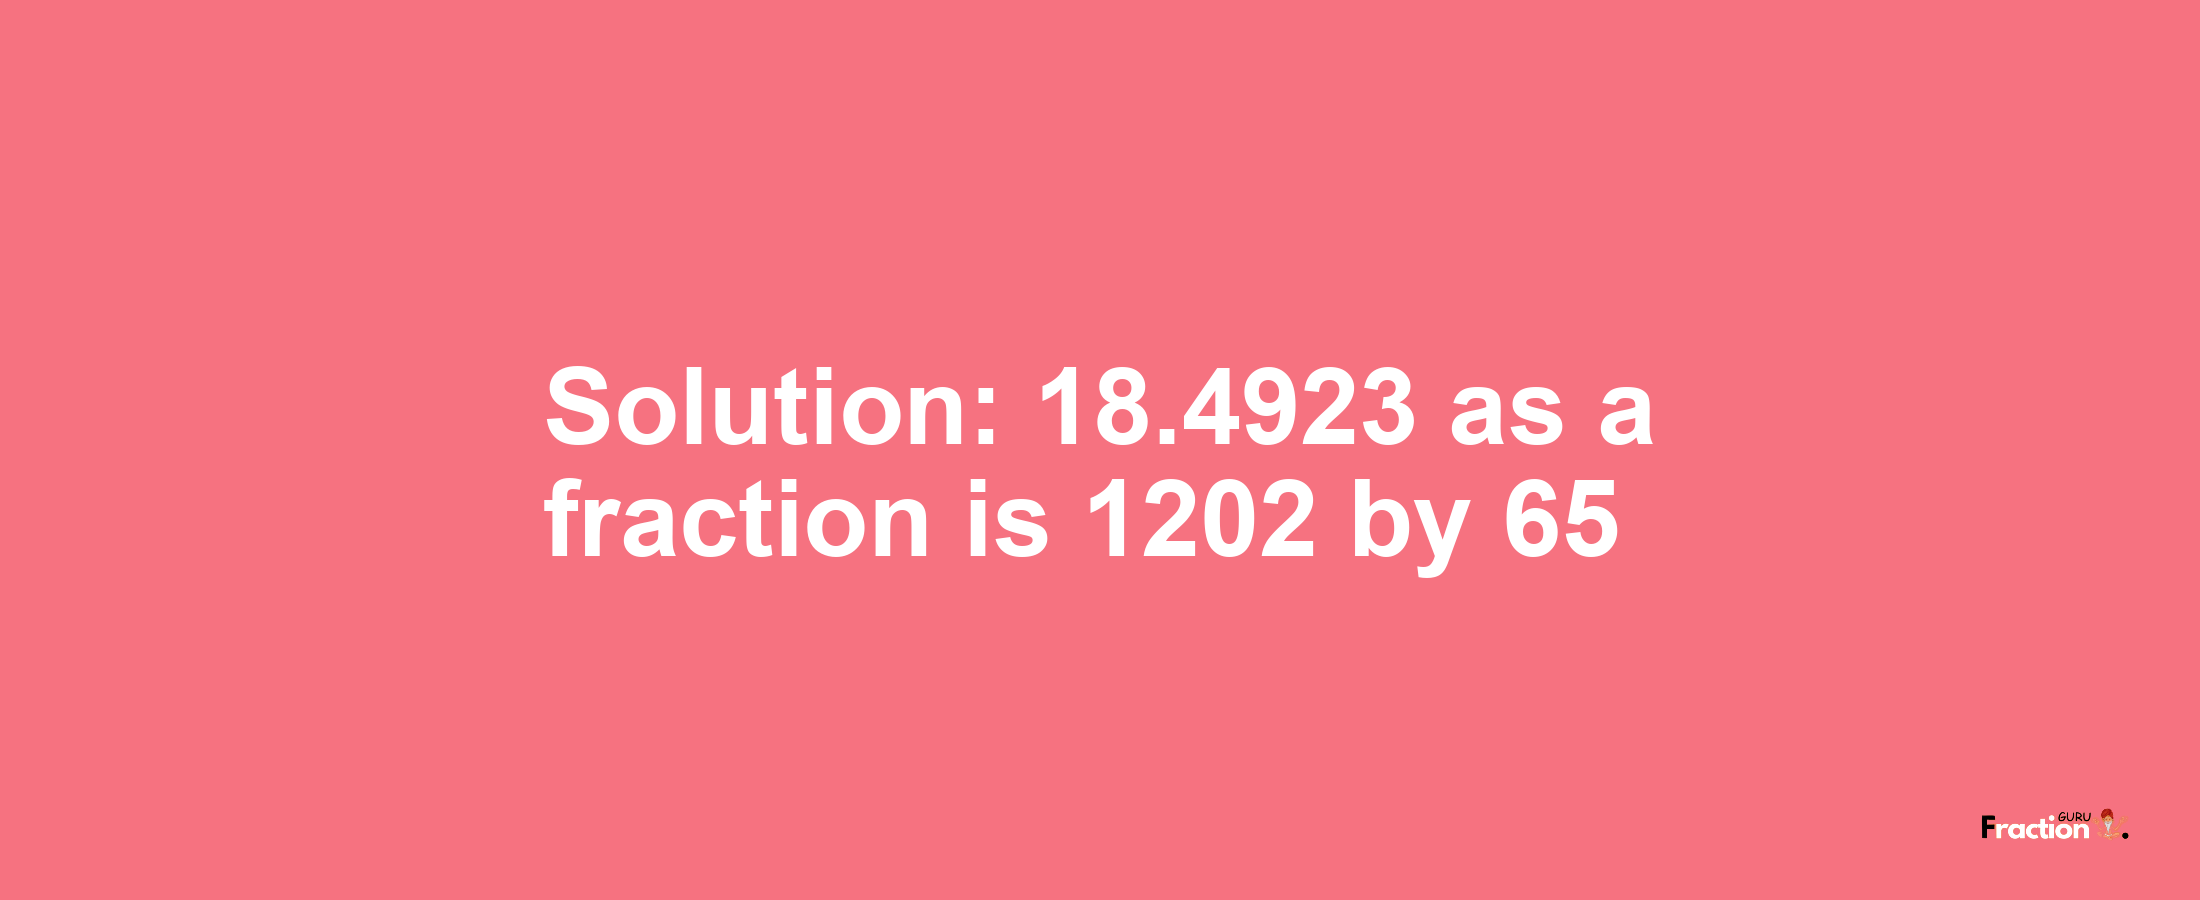 Solution:18.4923 as a fraction is 1202/65